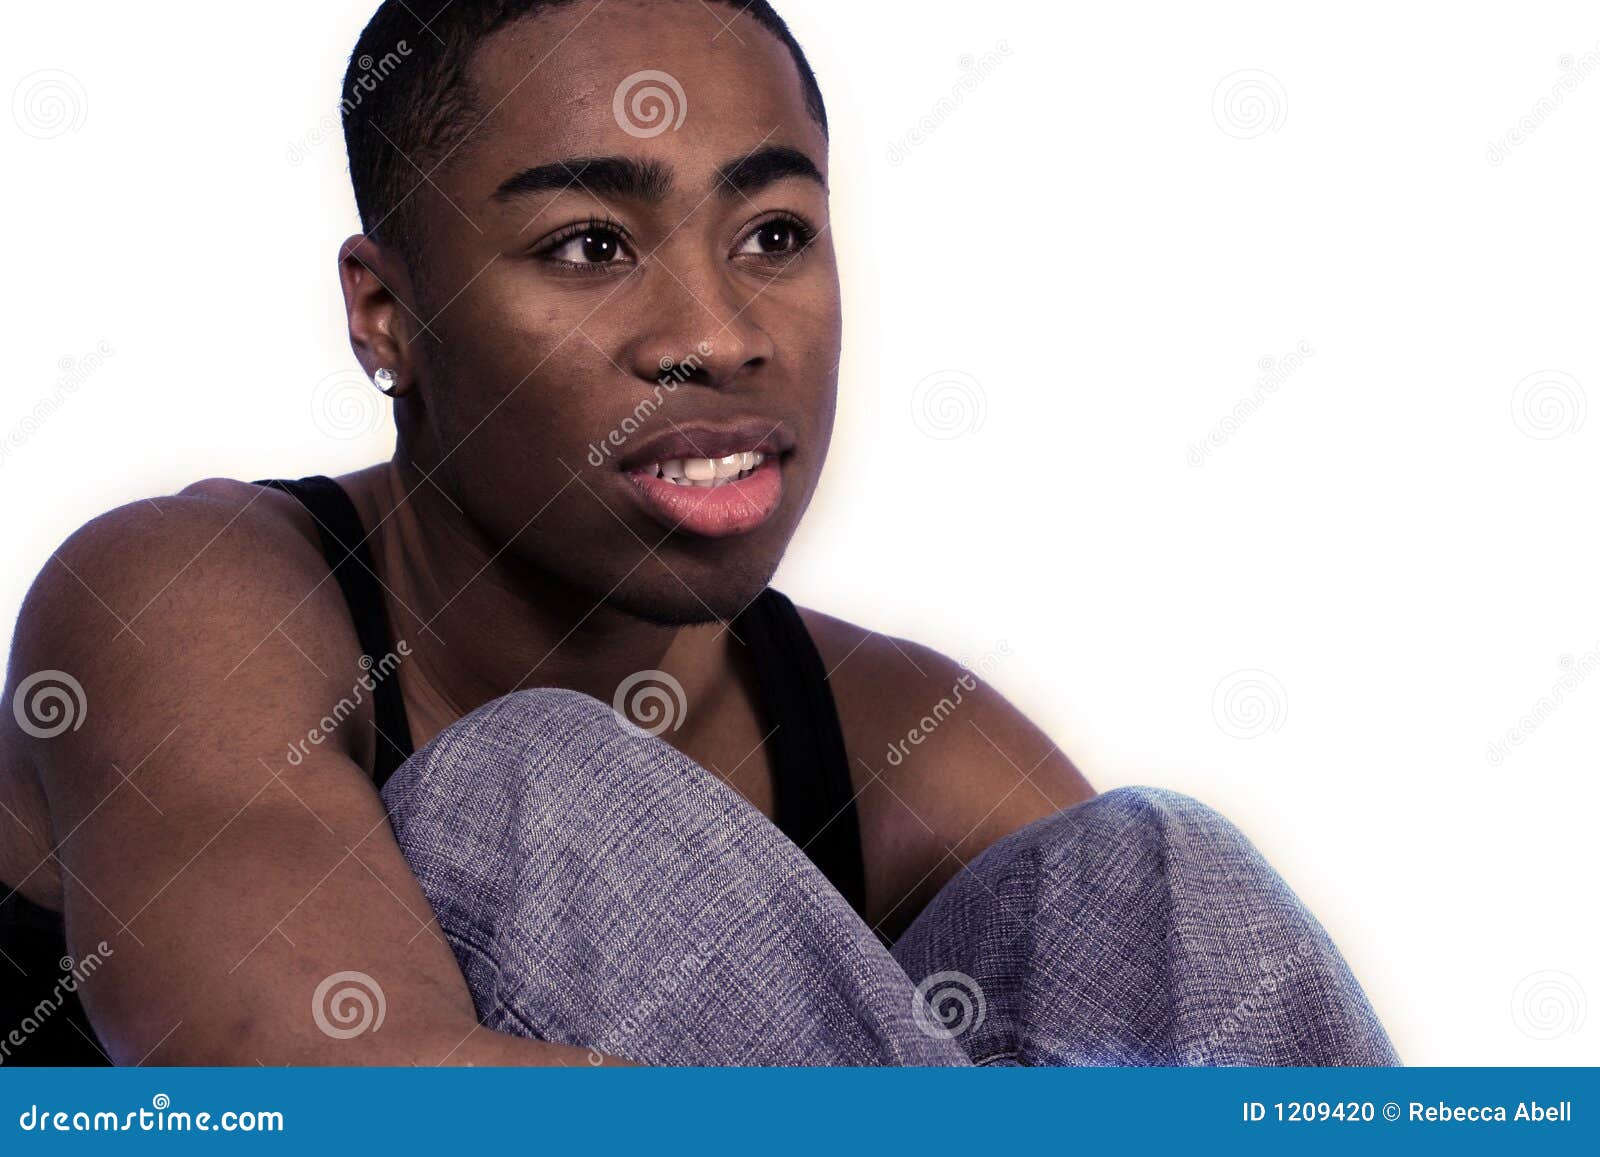 Attractive Man. Young attractive African American man